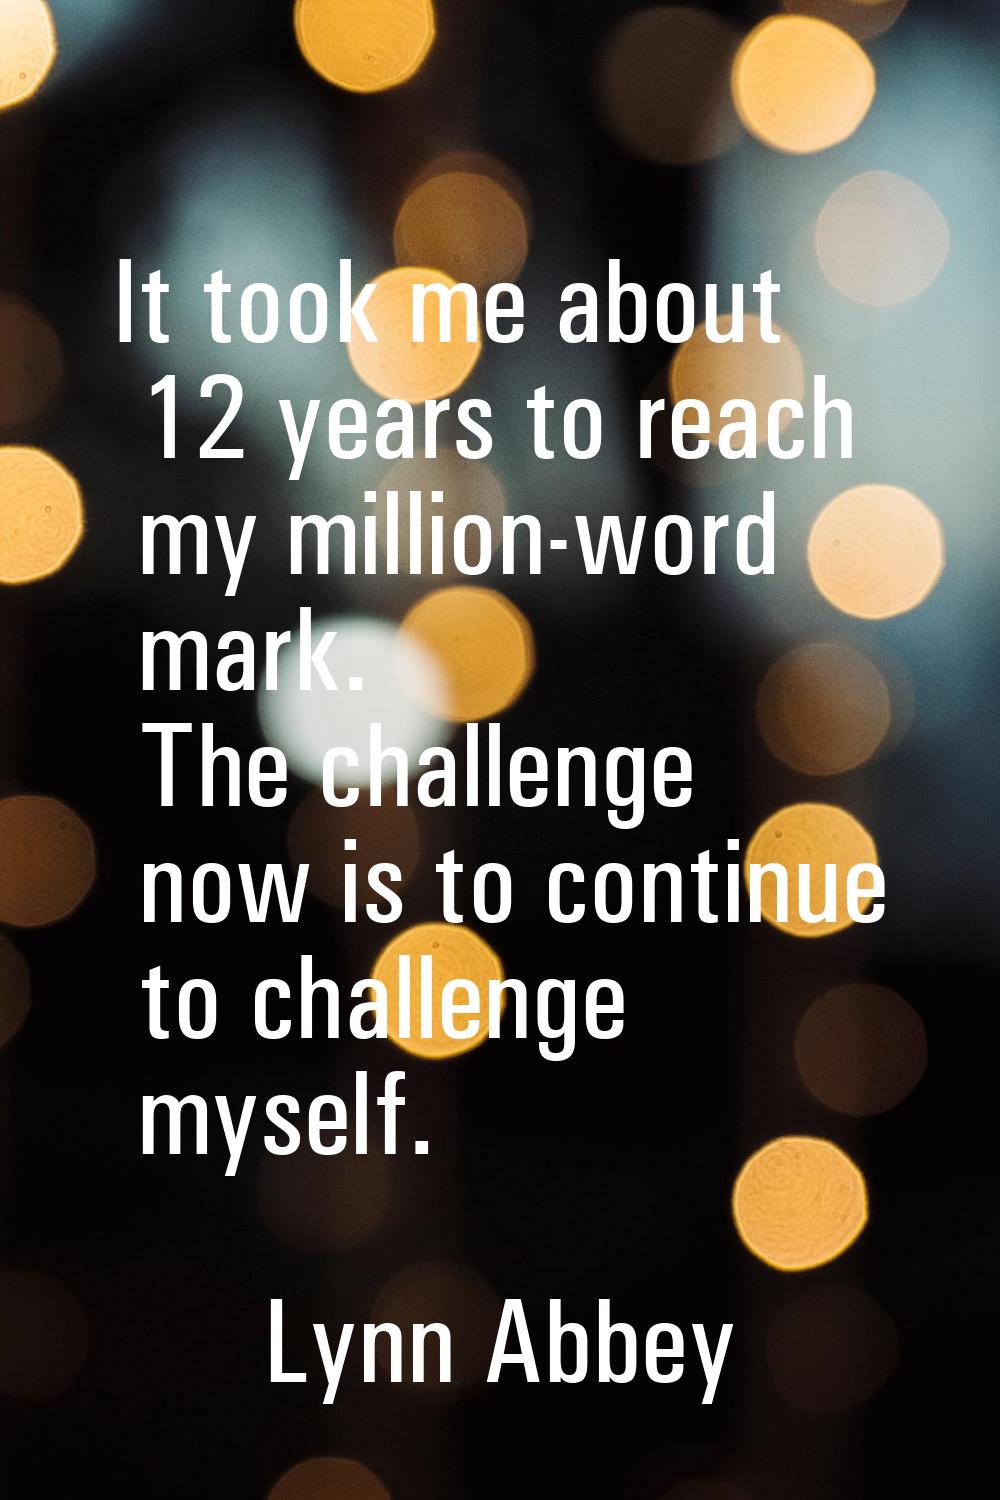 It took me about 12 years to reach my million-word mark. The challenge now is to continue to challe